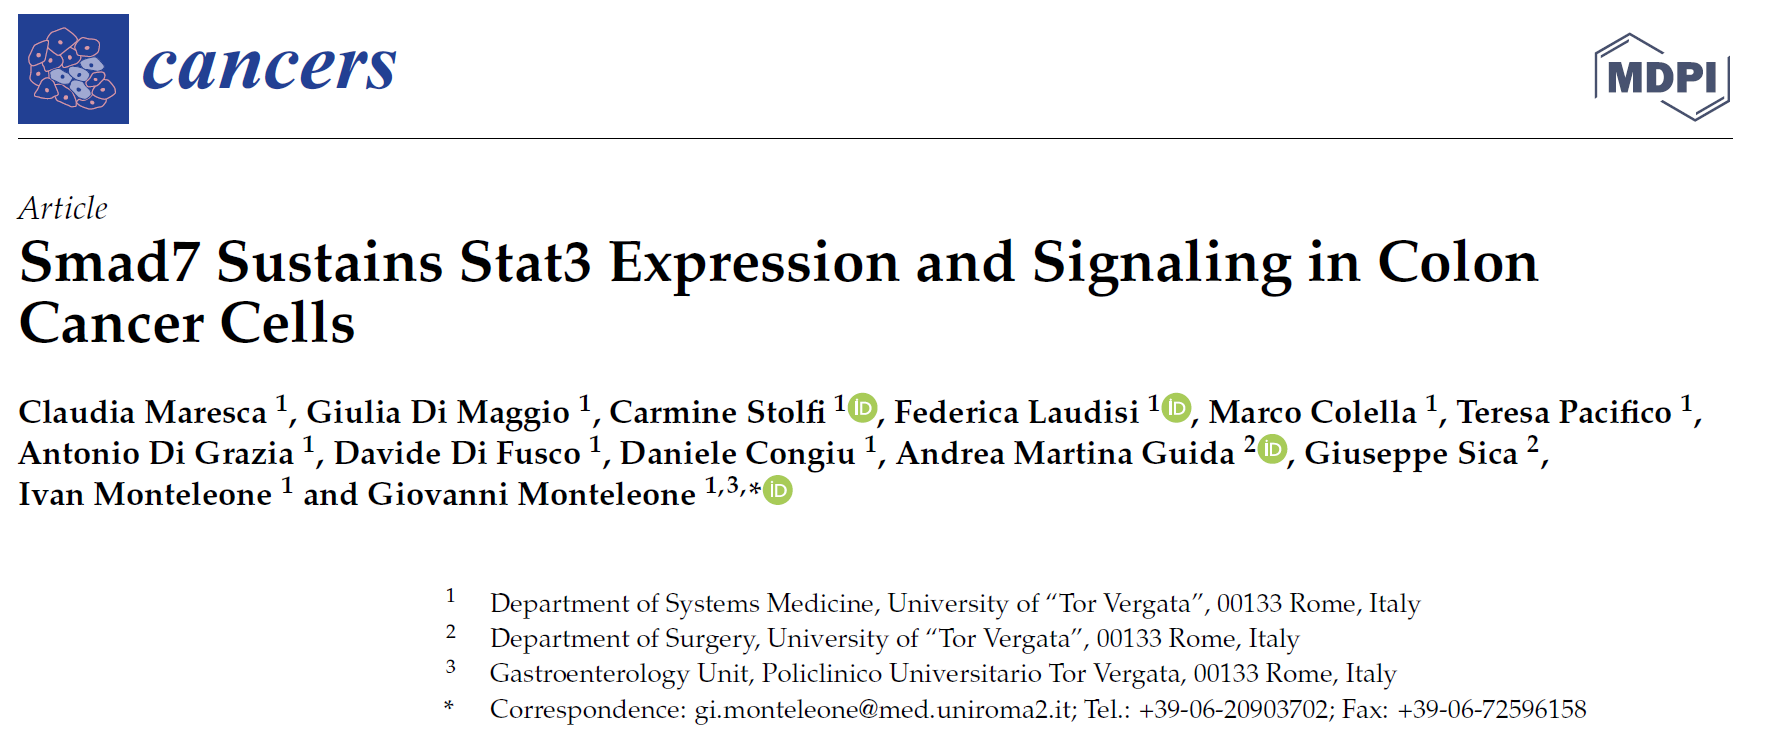 Smad7 Sustains Stat3 Expression and Signaling in Colon Cancer Cells